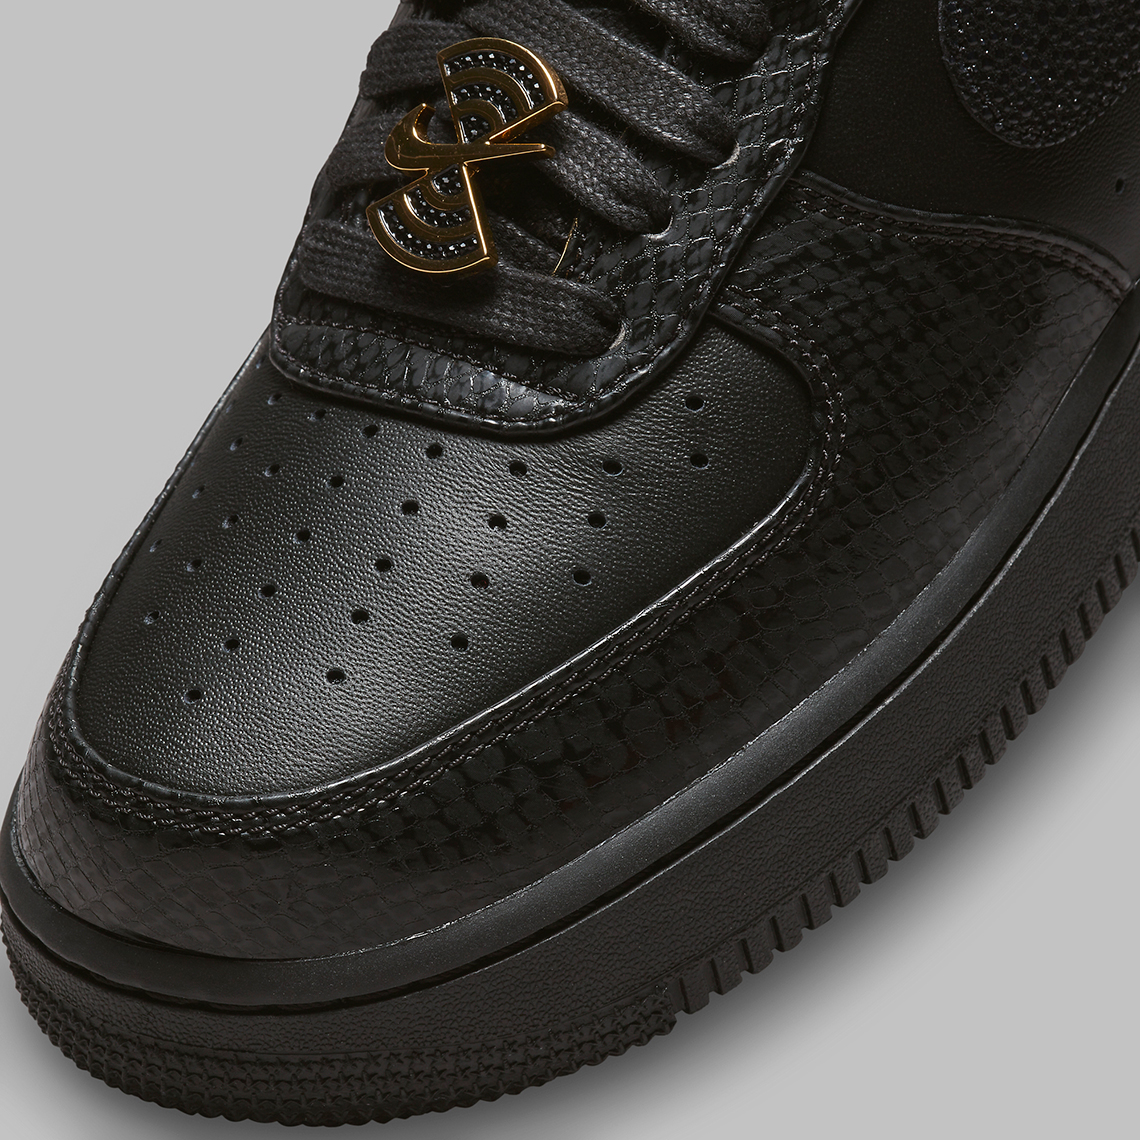 nike air force 1 low 40th anniversary black gold snakeskin 5